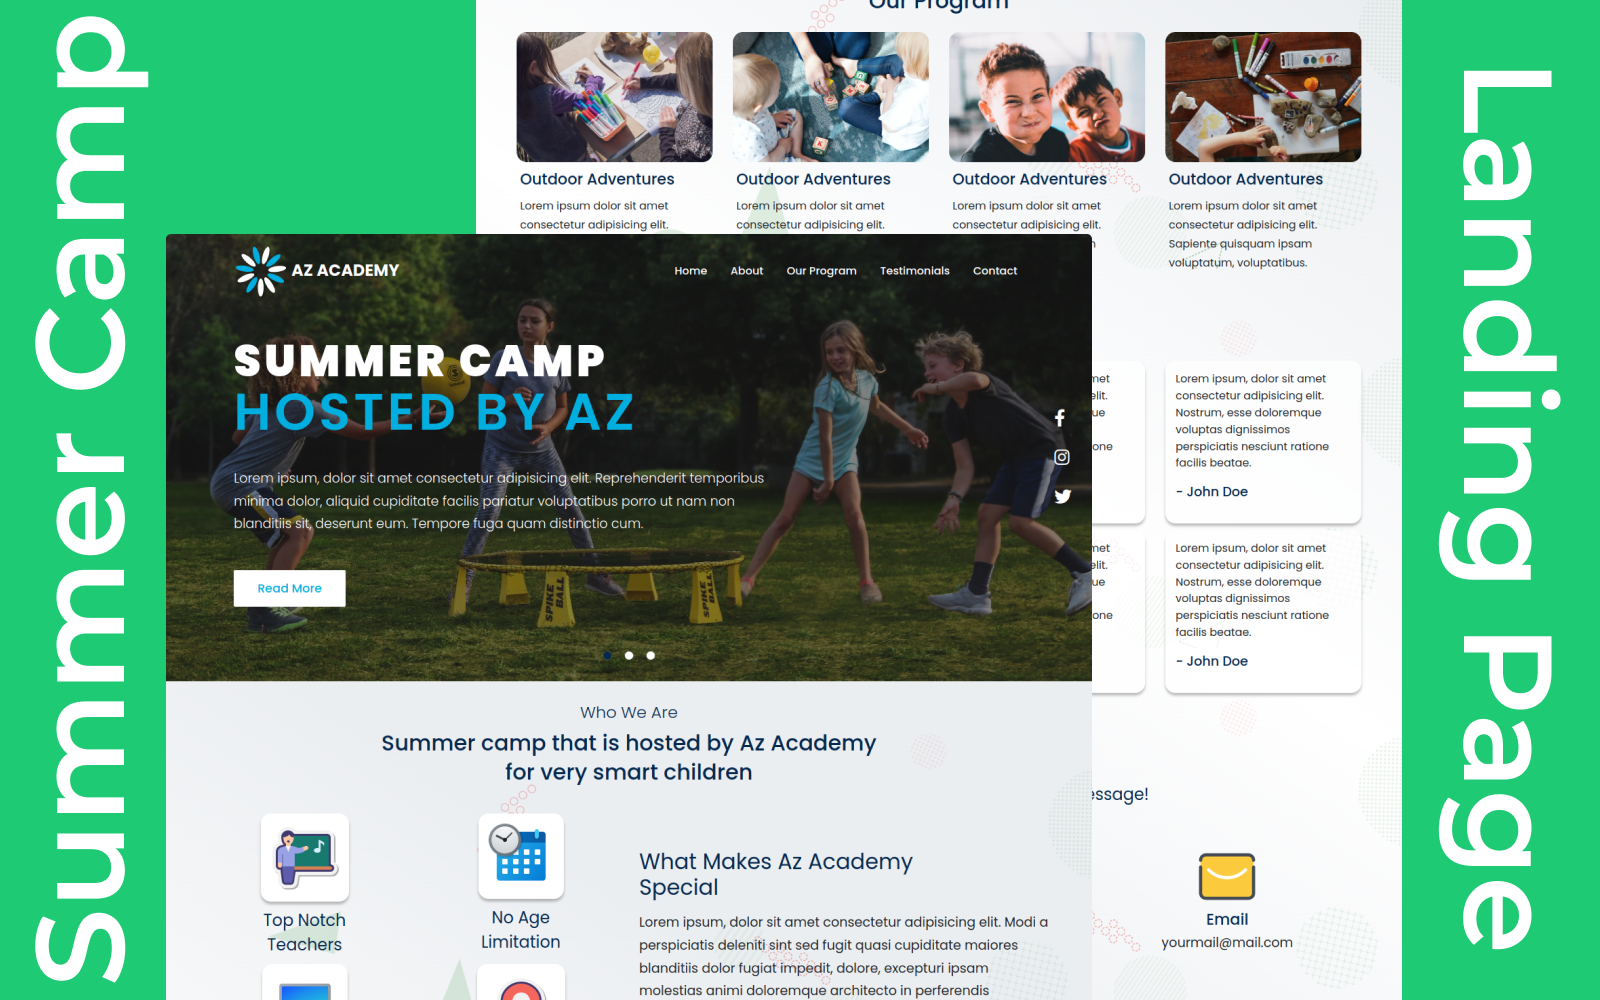 Summer Camp Landing Page Template